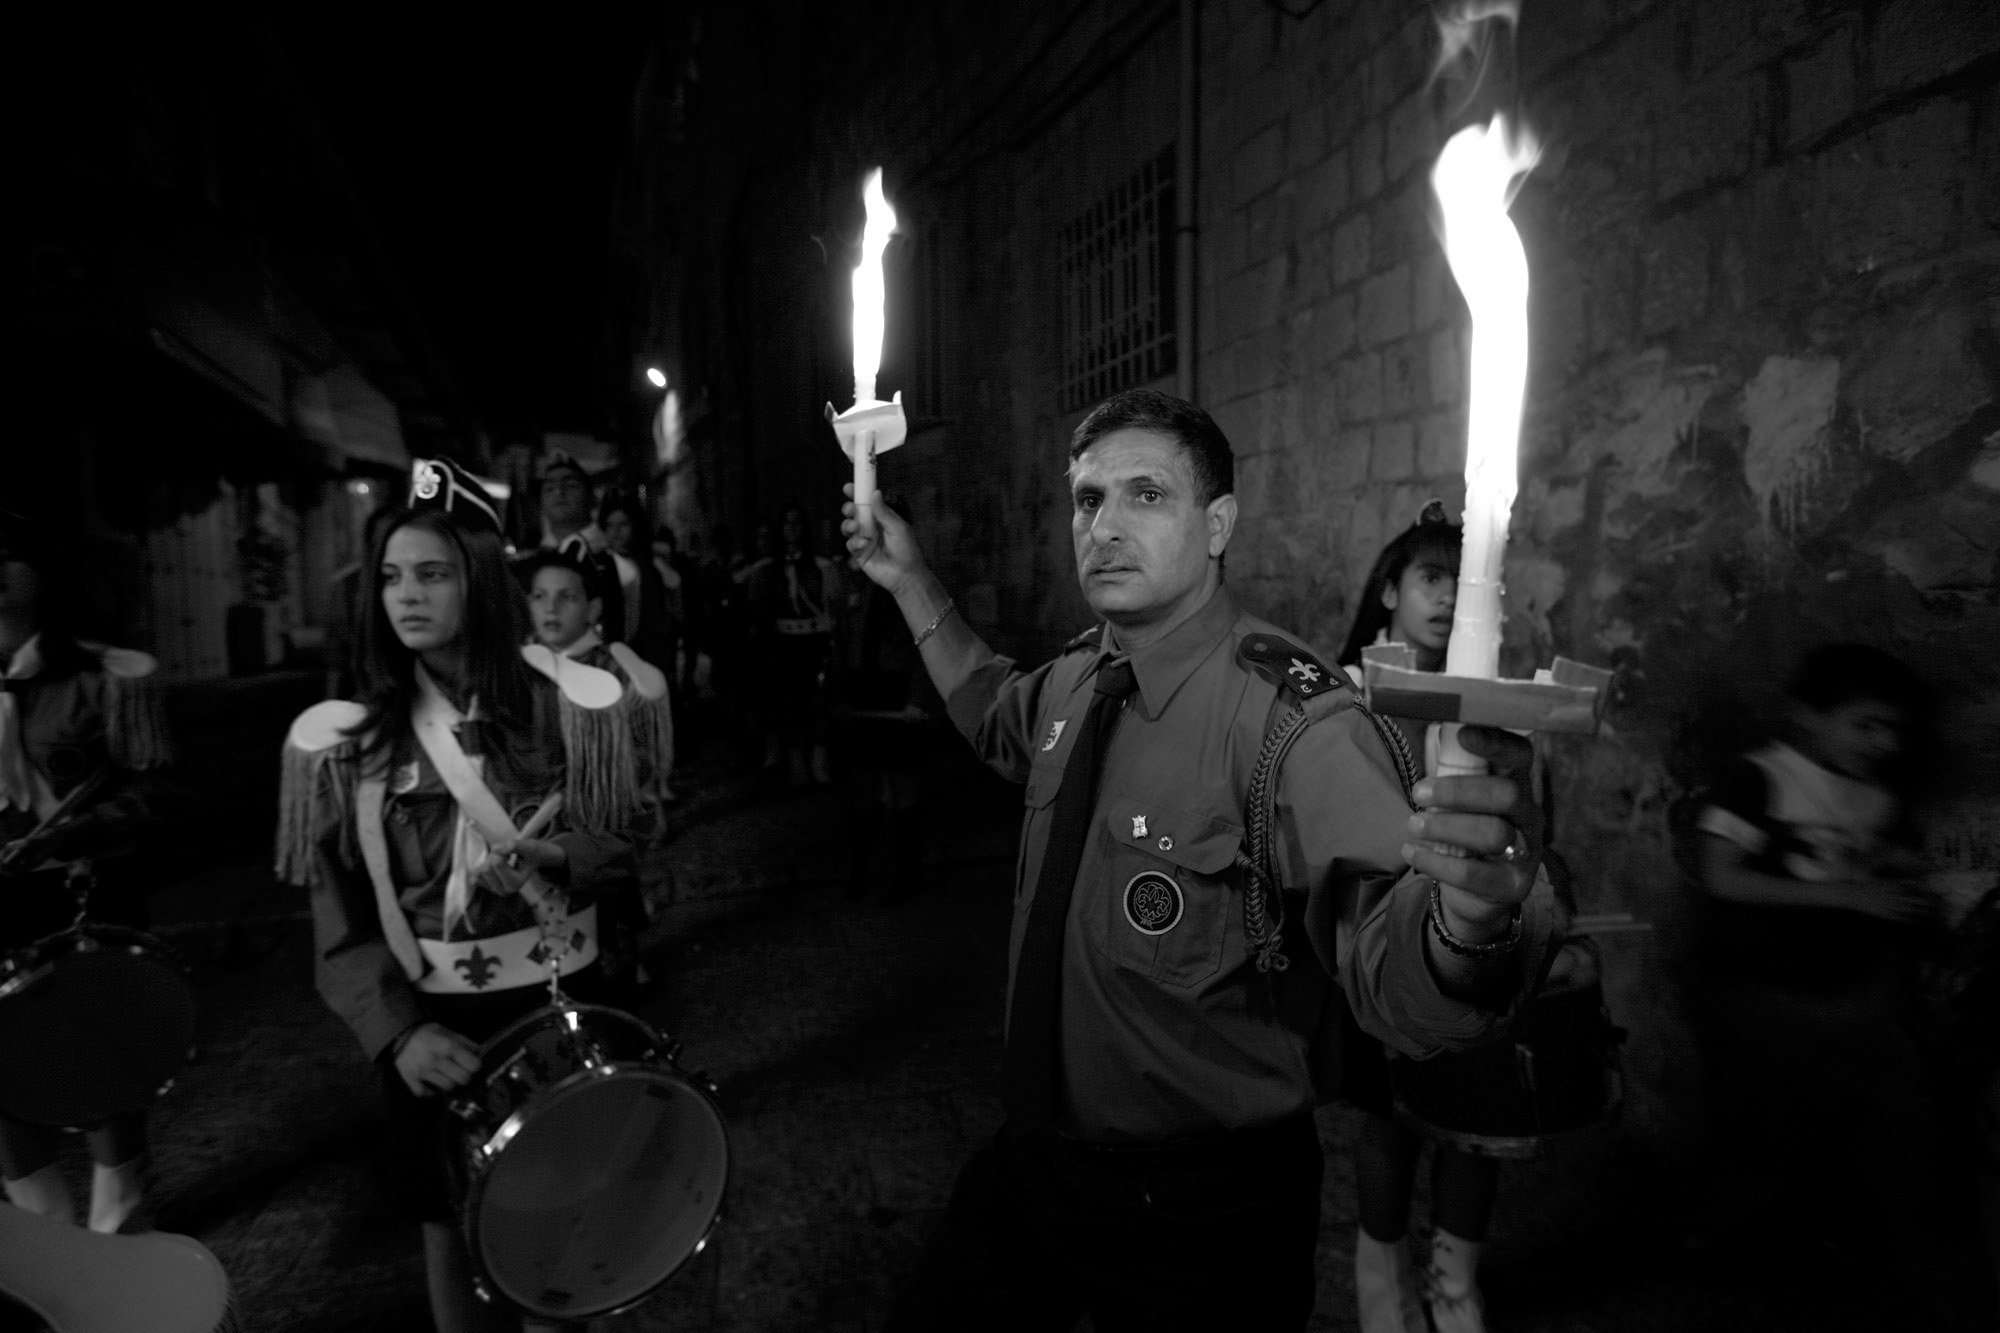  Palestinian Catholics celebrate their faith in the streets in the Old City of Jerusalem. 